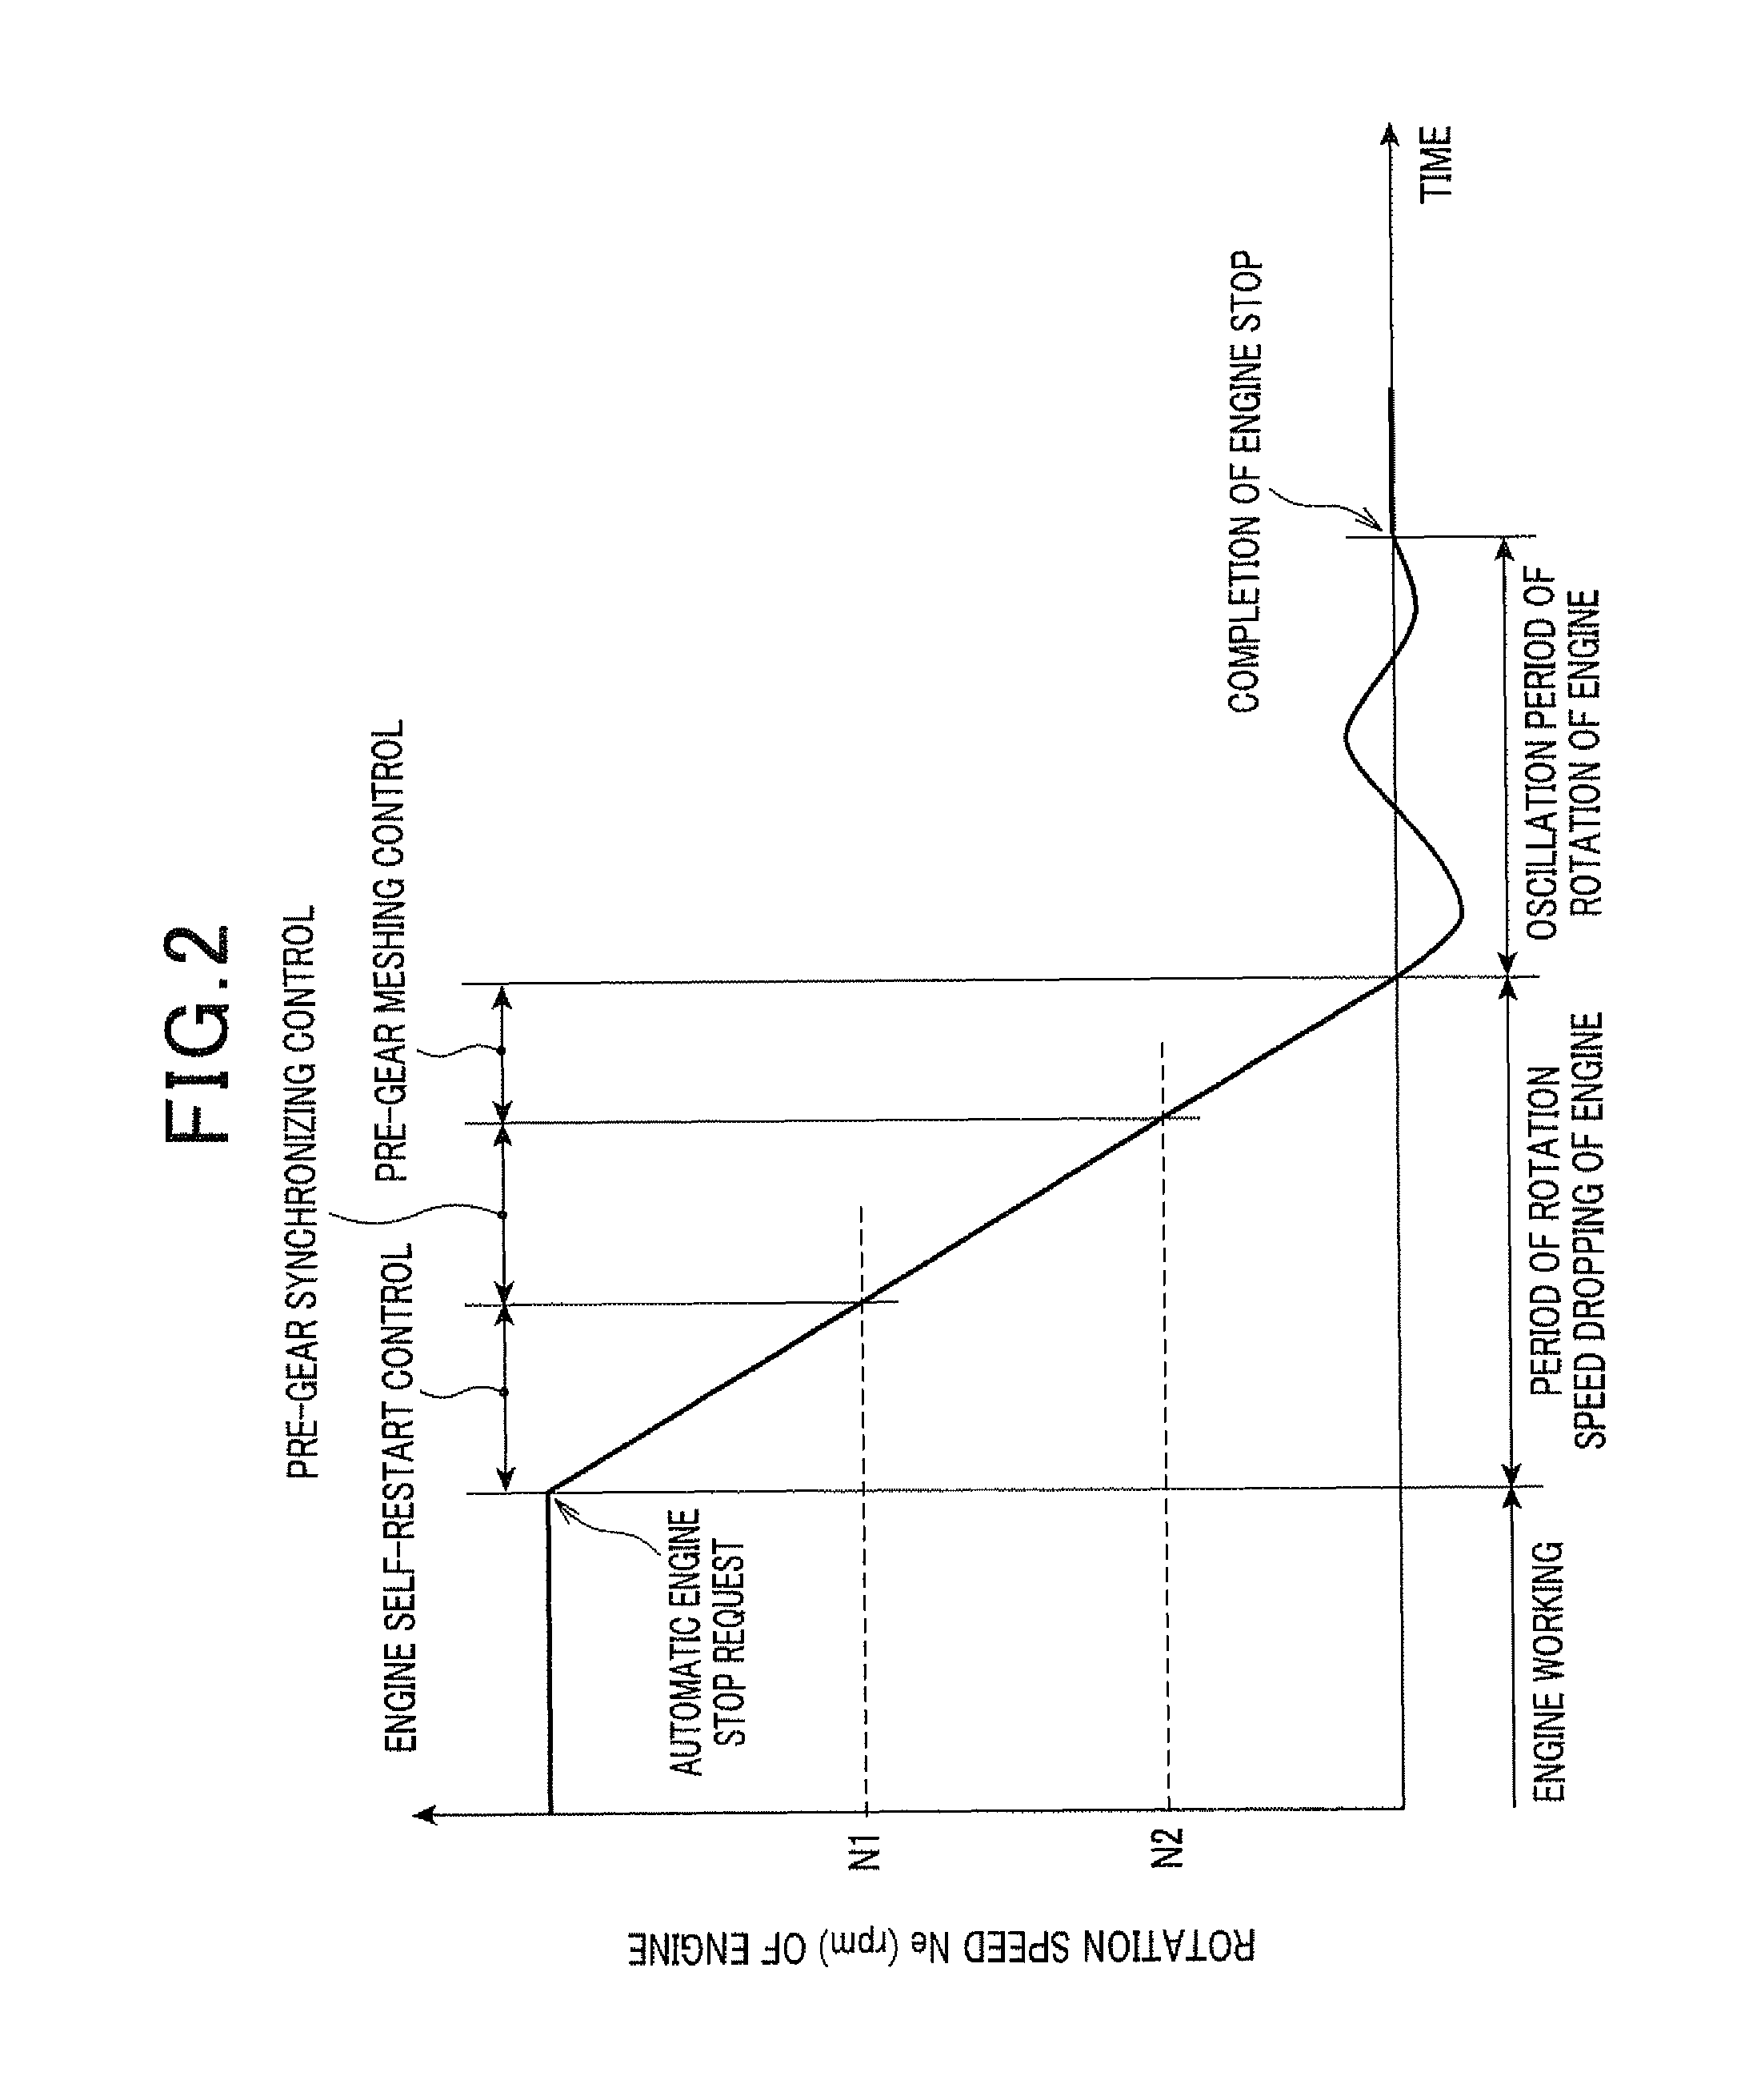 Control device of automatic engine stop and start